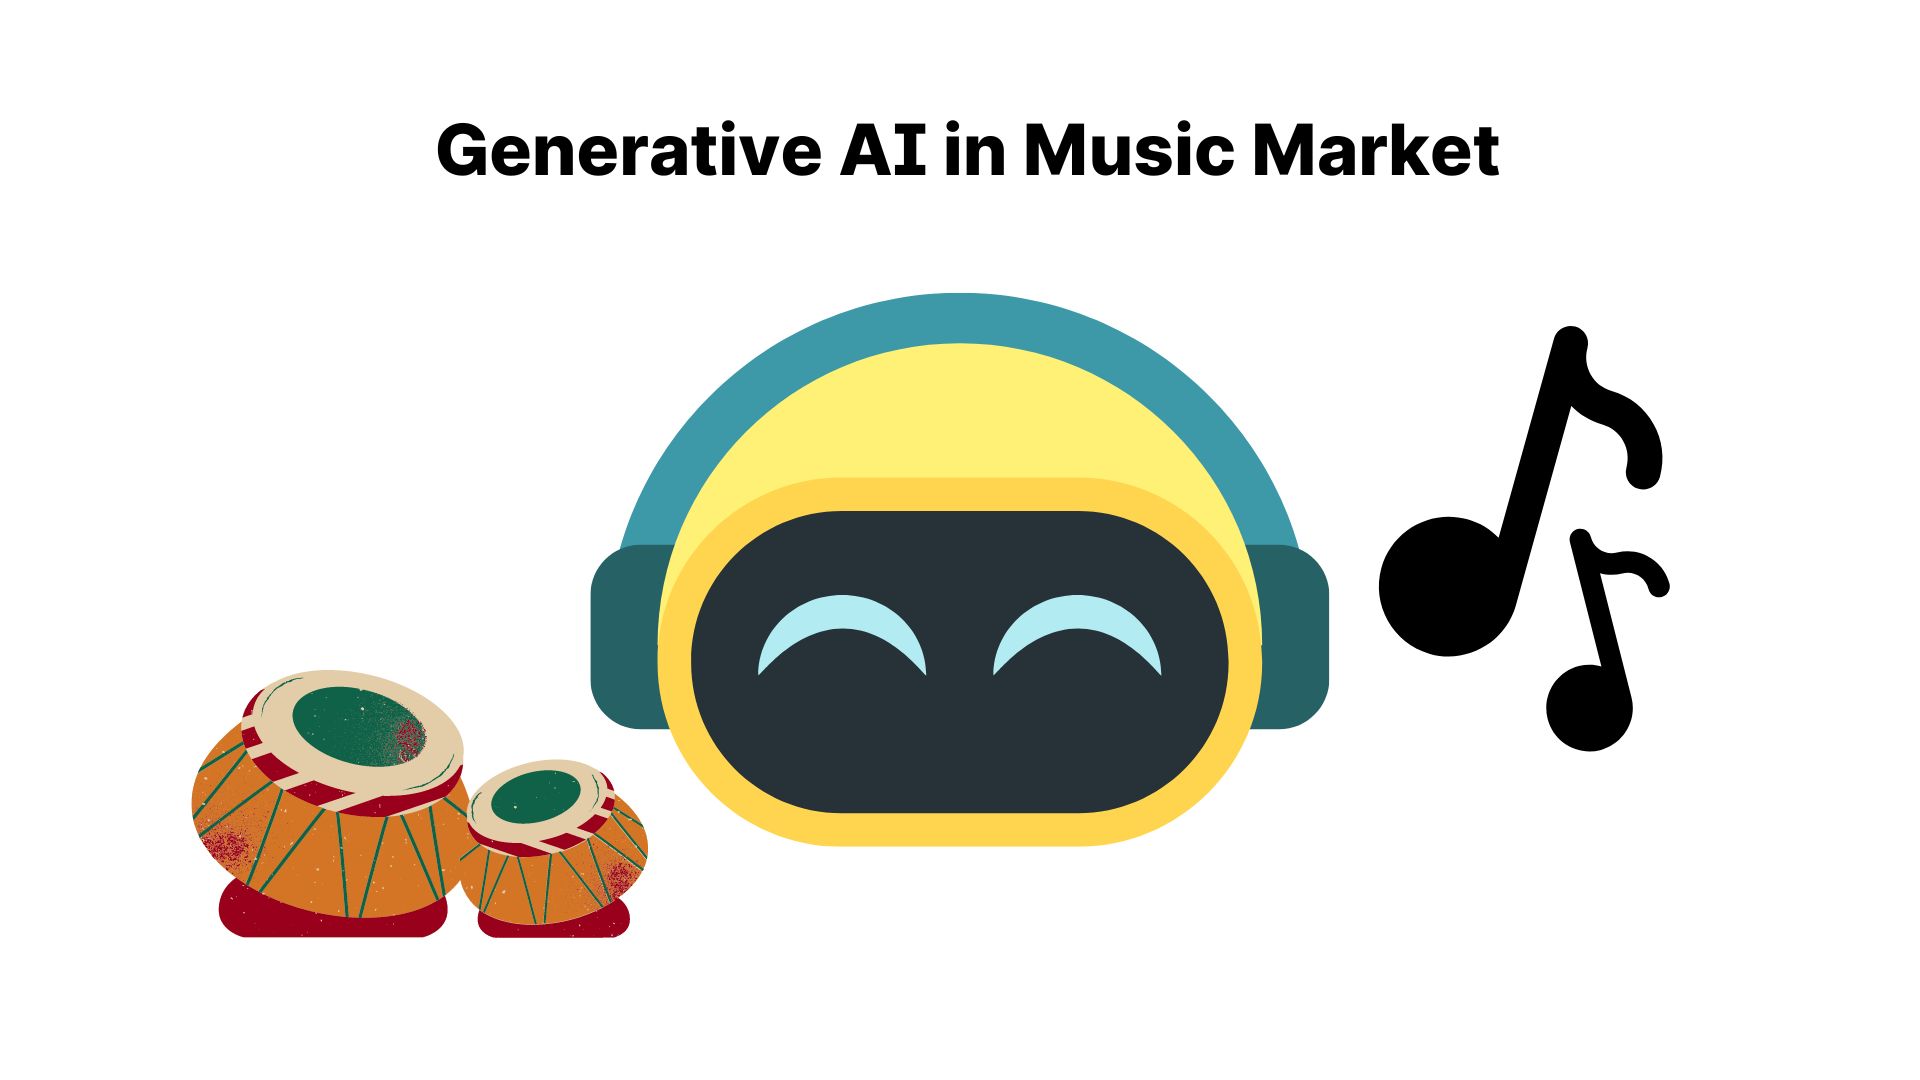 Generative AI in Music Market Size to hit USD 2,833 Bn, Globally, by 2032